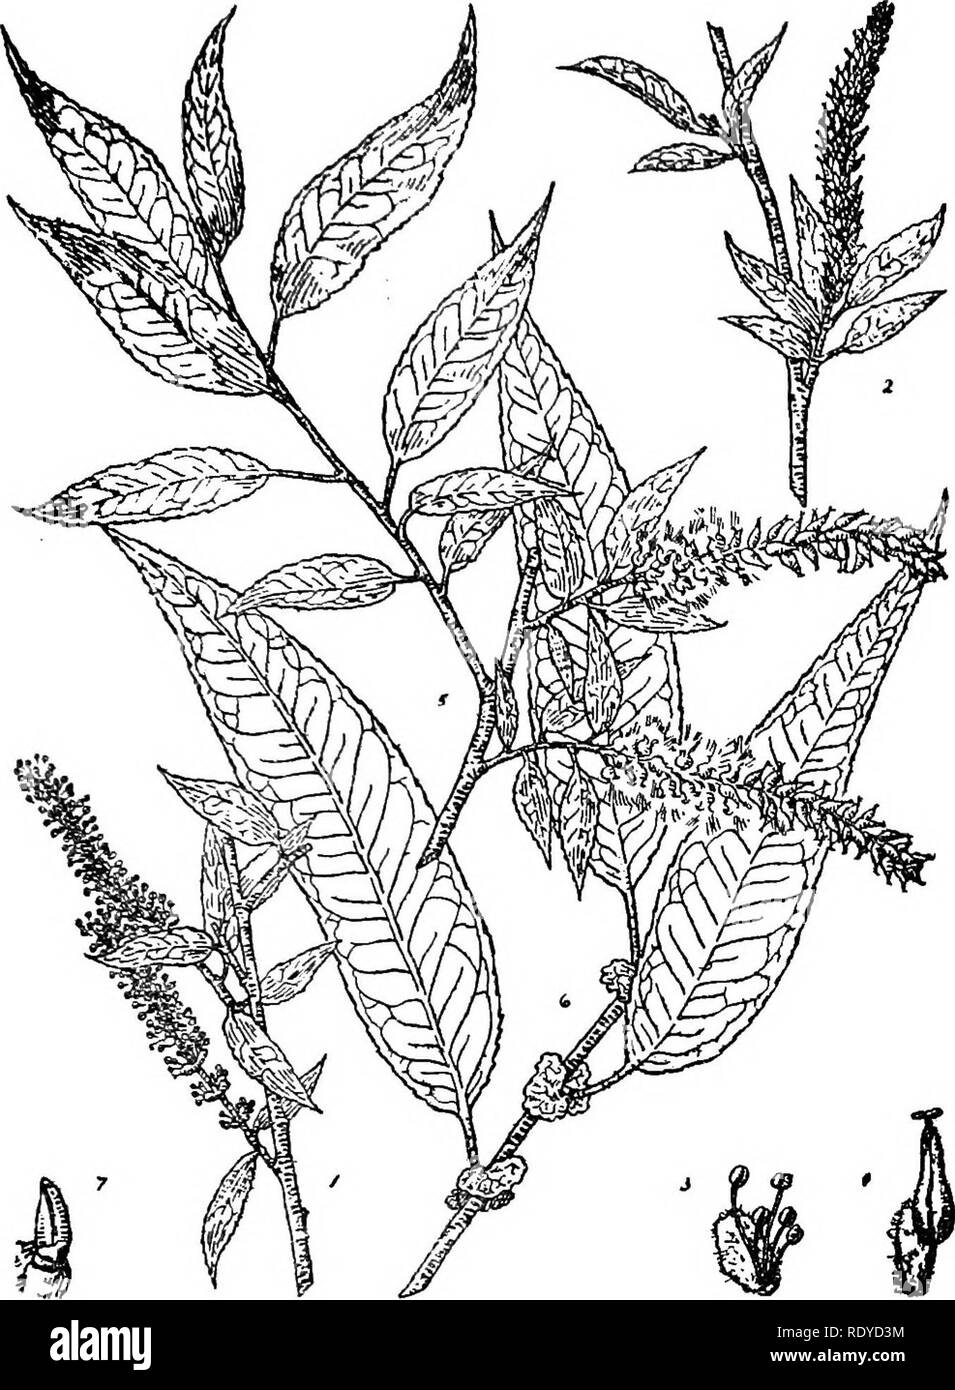 . A manual of poisonous plants, chiefly of eastern North America, with brief notes on economic and medicinal plants, and numerous illustrations. Poisonous plants. SPERMATOPHYTA—SALICACEAE 397. Fig. 178. Peach-leaved Willow (Salix amygdaloides). 1. Flower- ing branch of staminate tree. 2. Same of pistillate tree. 3. Staminate flower, with scale, enlarged. 4. Pistillate flower enlarged. 5. Fruiting branch. 6. Summer branch. 7. Bud and leaf scar. 1, 2, 5, 6, one- half natural size. M. M. Cheney. Stamens, subtended by a cup-shaped disk; pistillate flowers with a 1-celled ovary, stigmas 2-4, simple Stock Photo